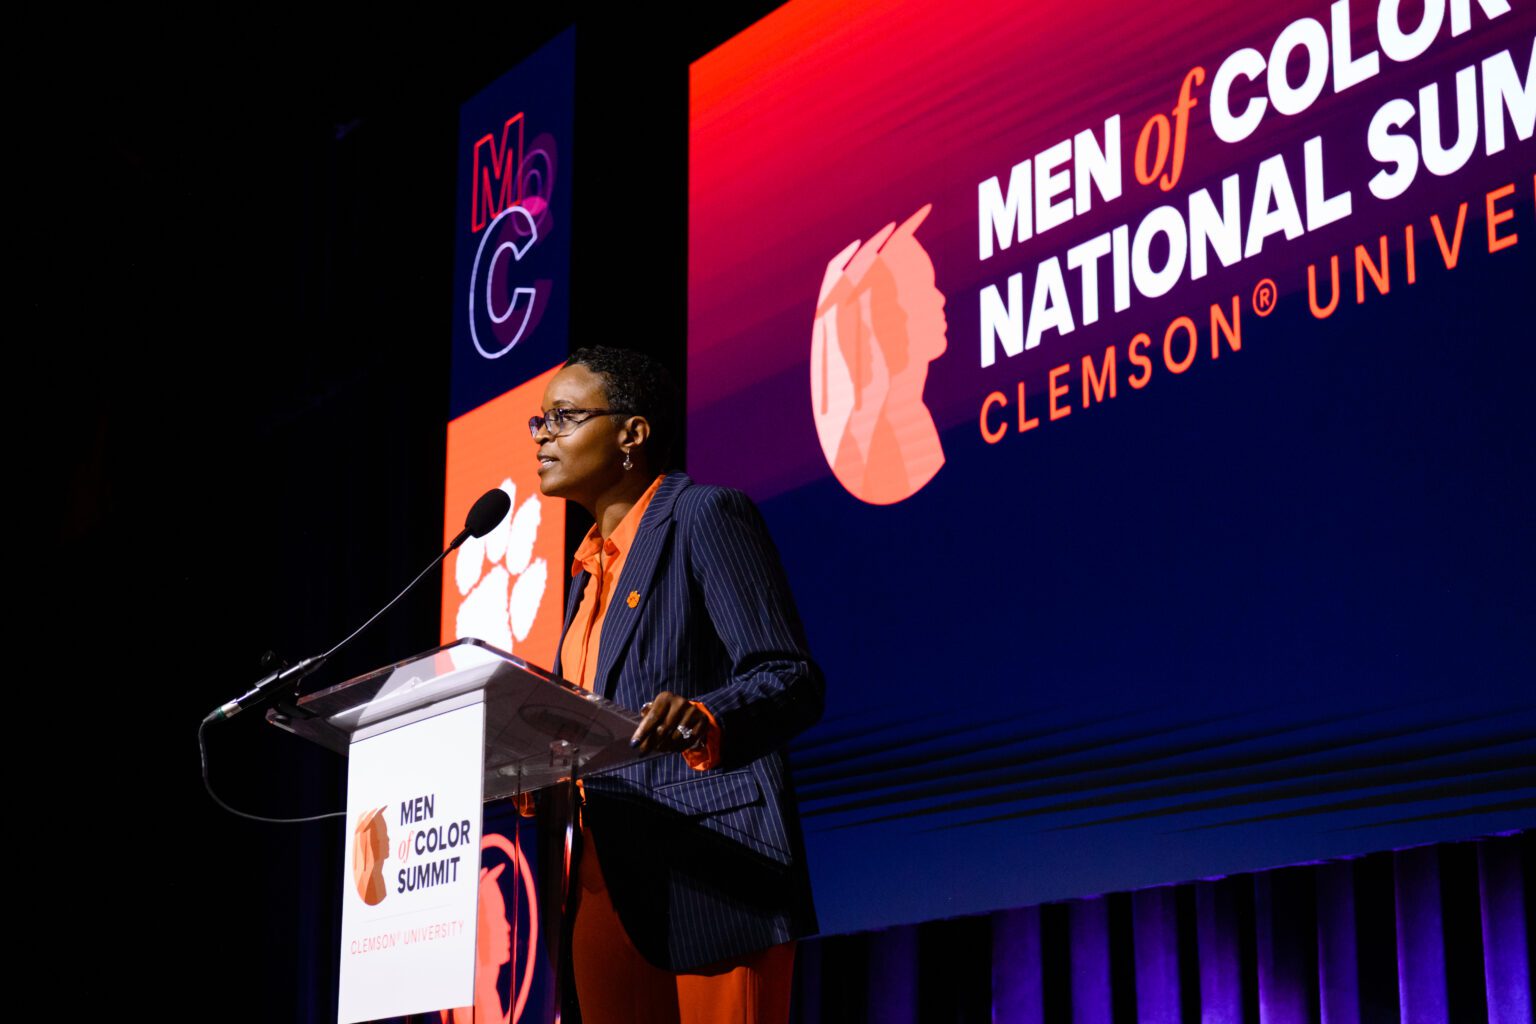 Clemson’s Men of Color National Summit gives rise to the next